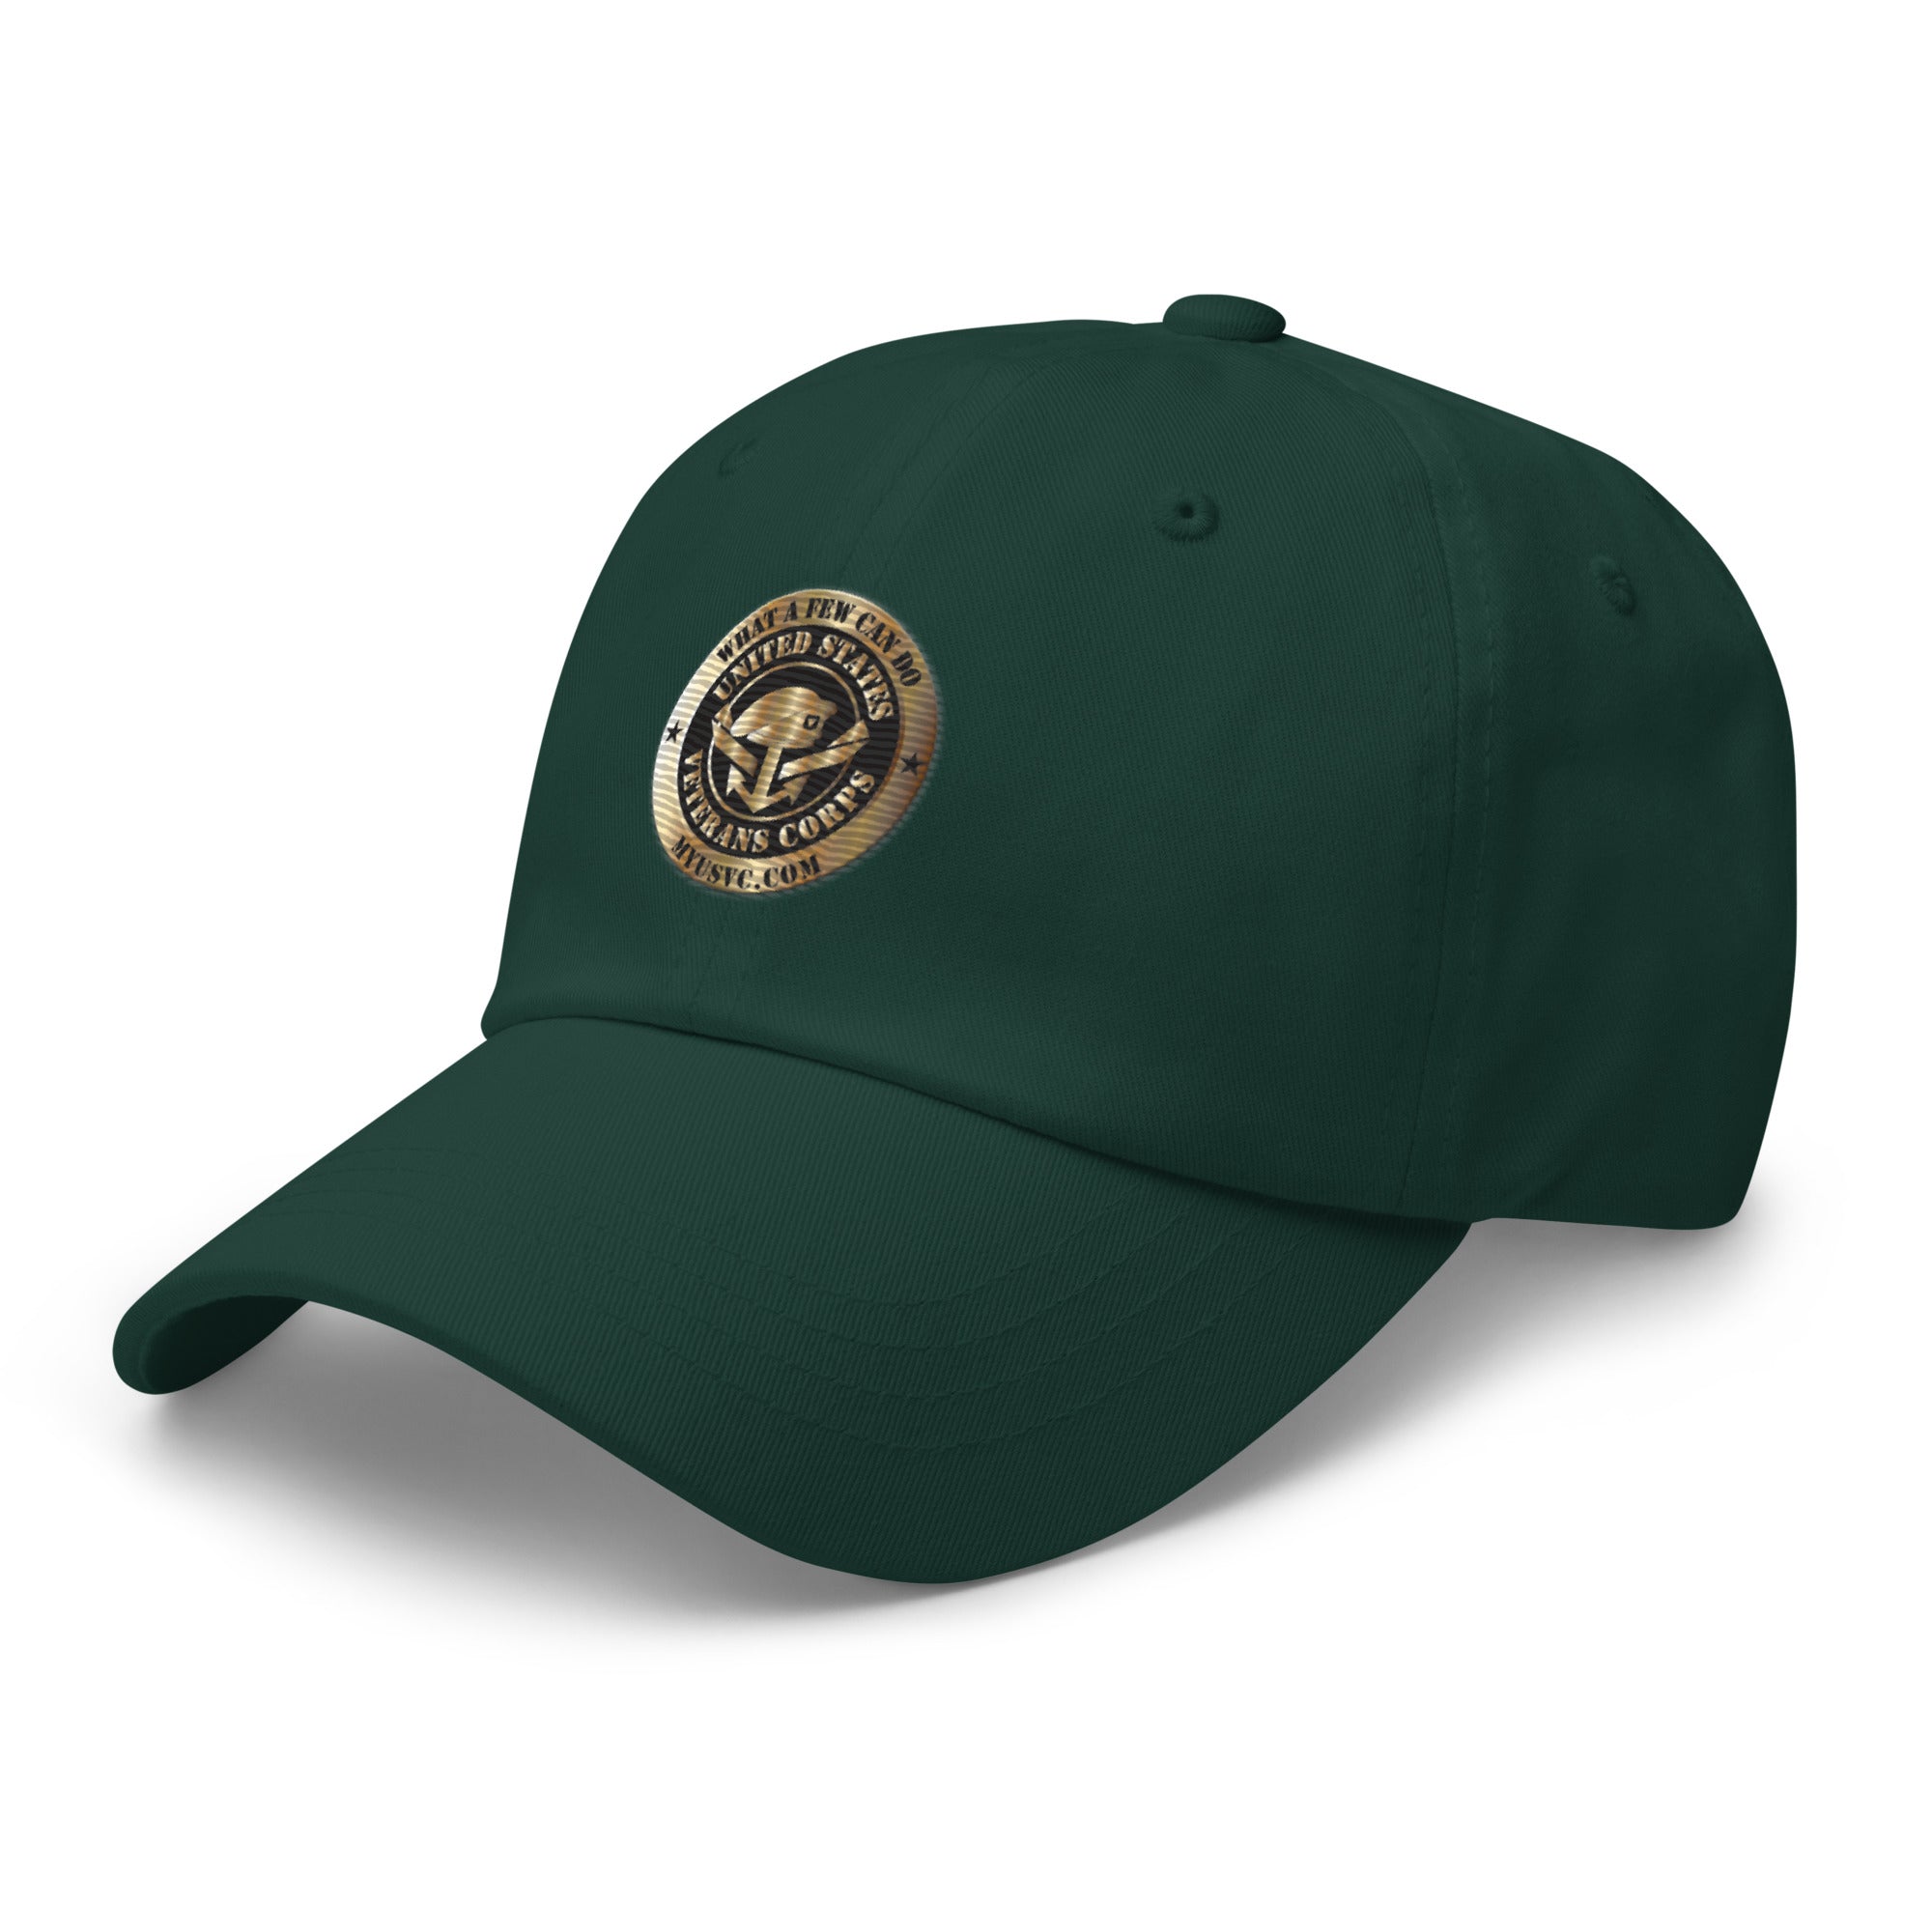 Heroes' Legacy Hat - Support Veterans, Build Homes – Laps of Honor